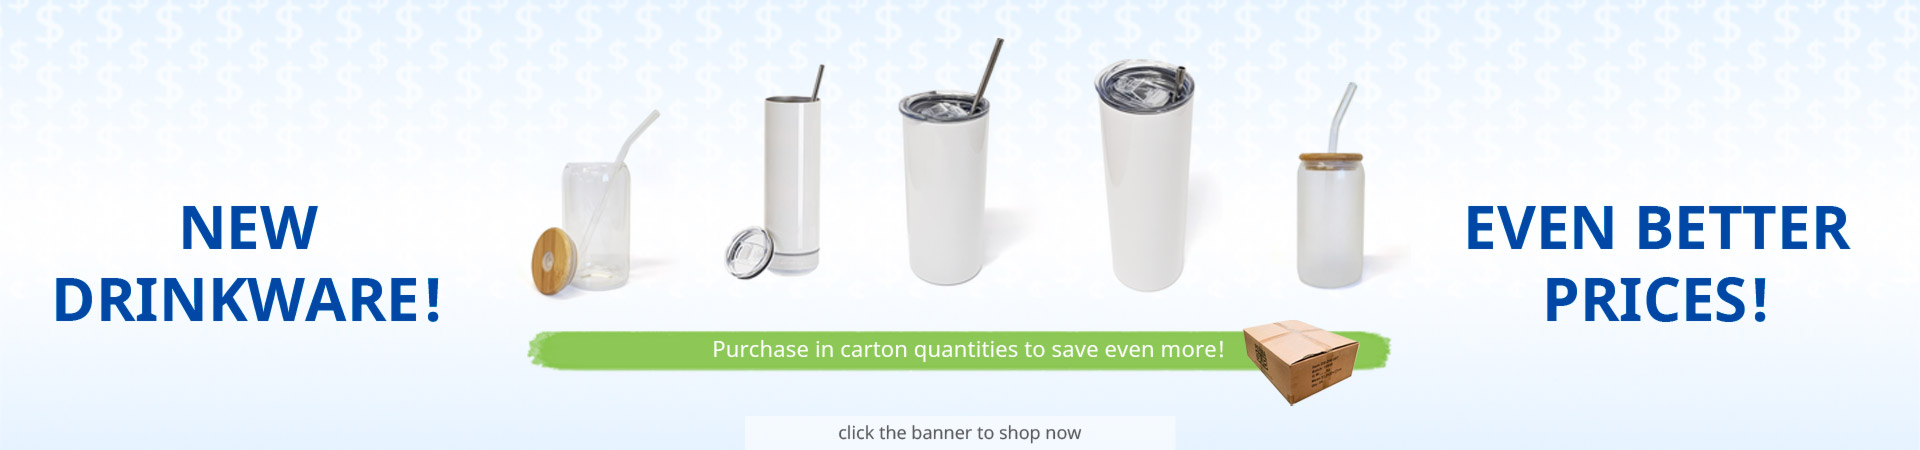  New sublimation drinkware at even better prices!